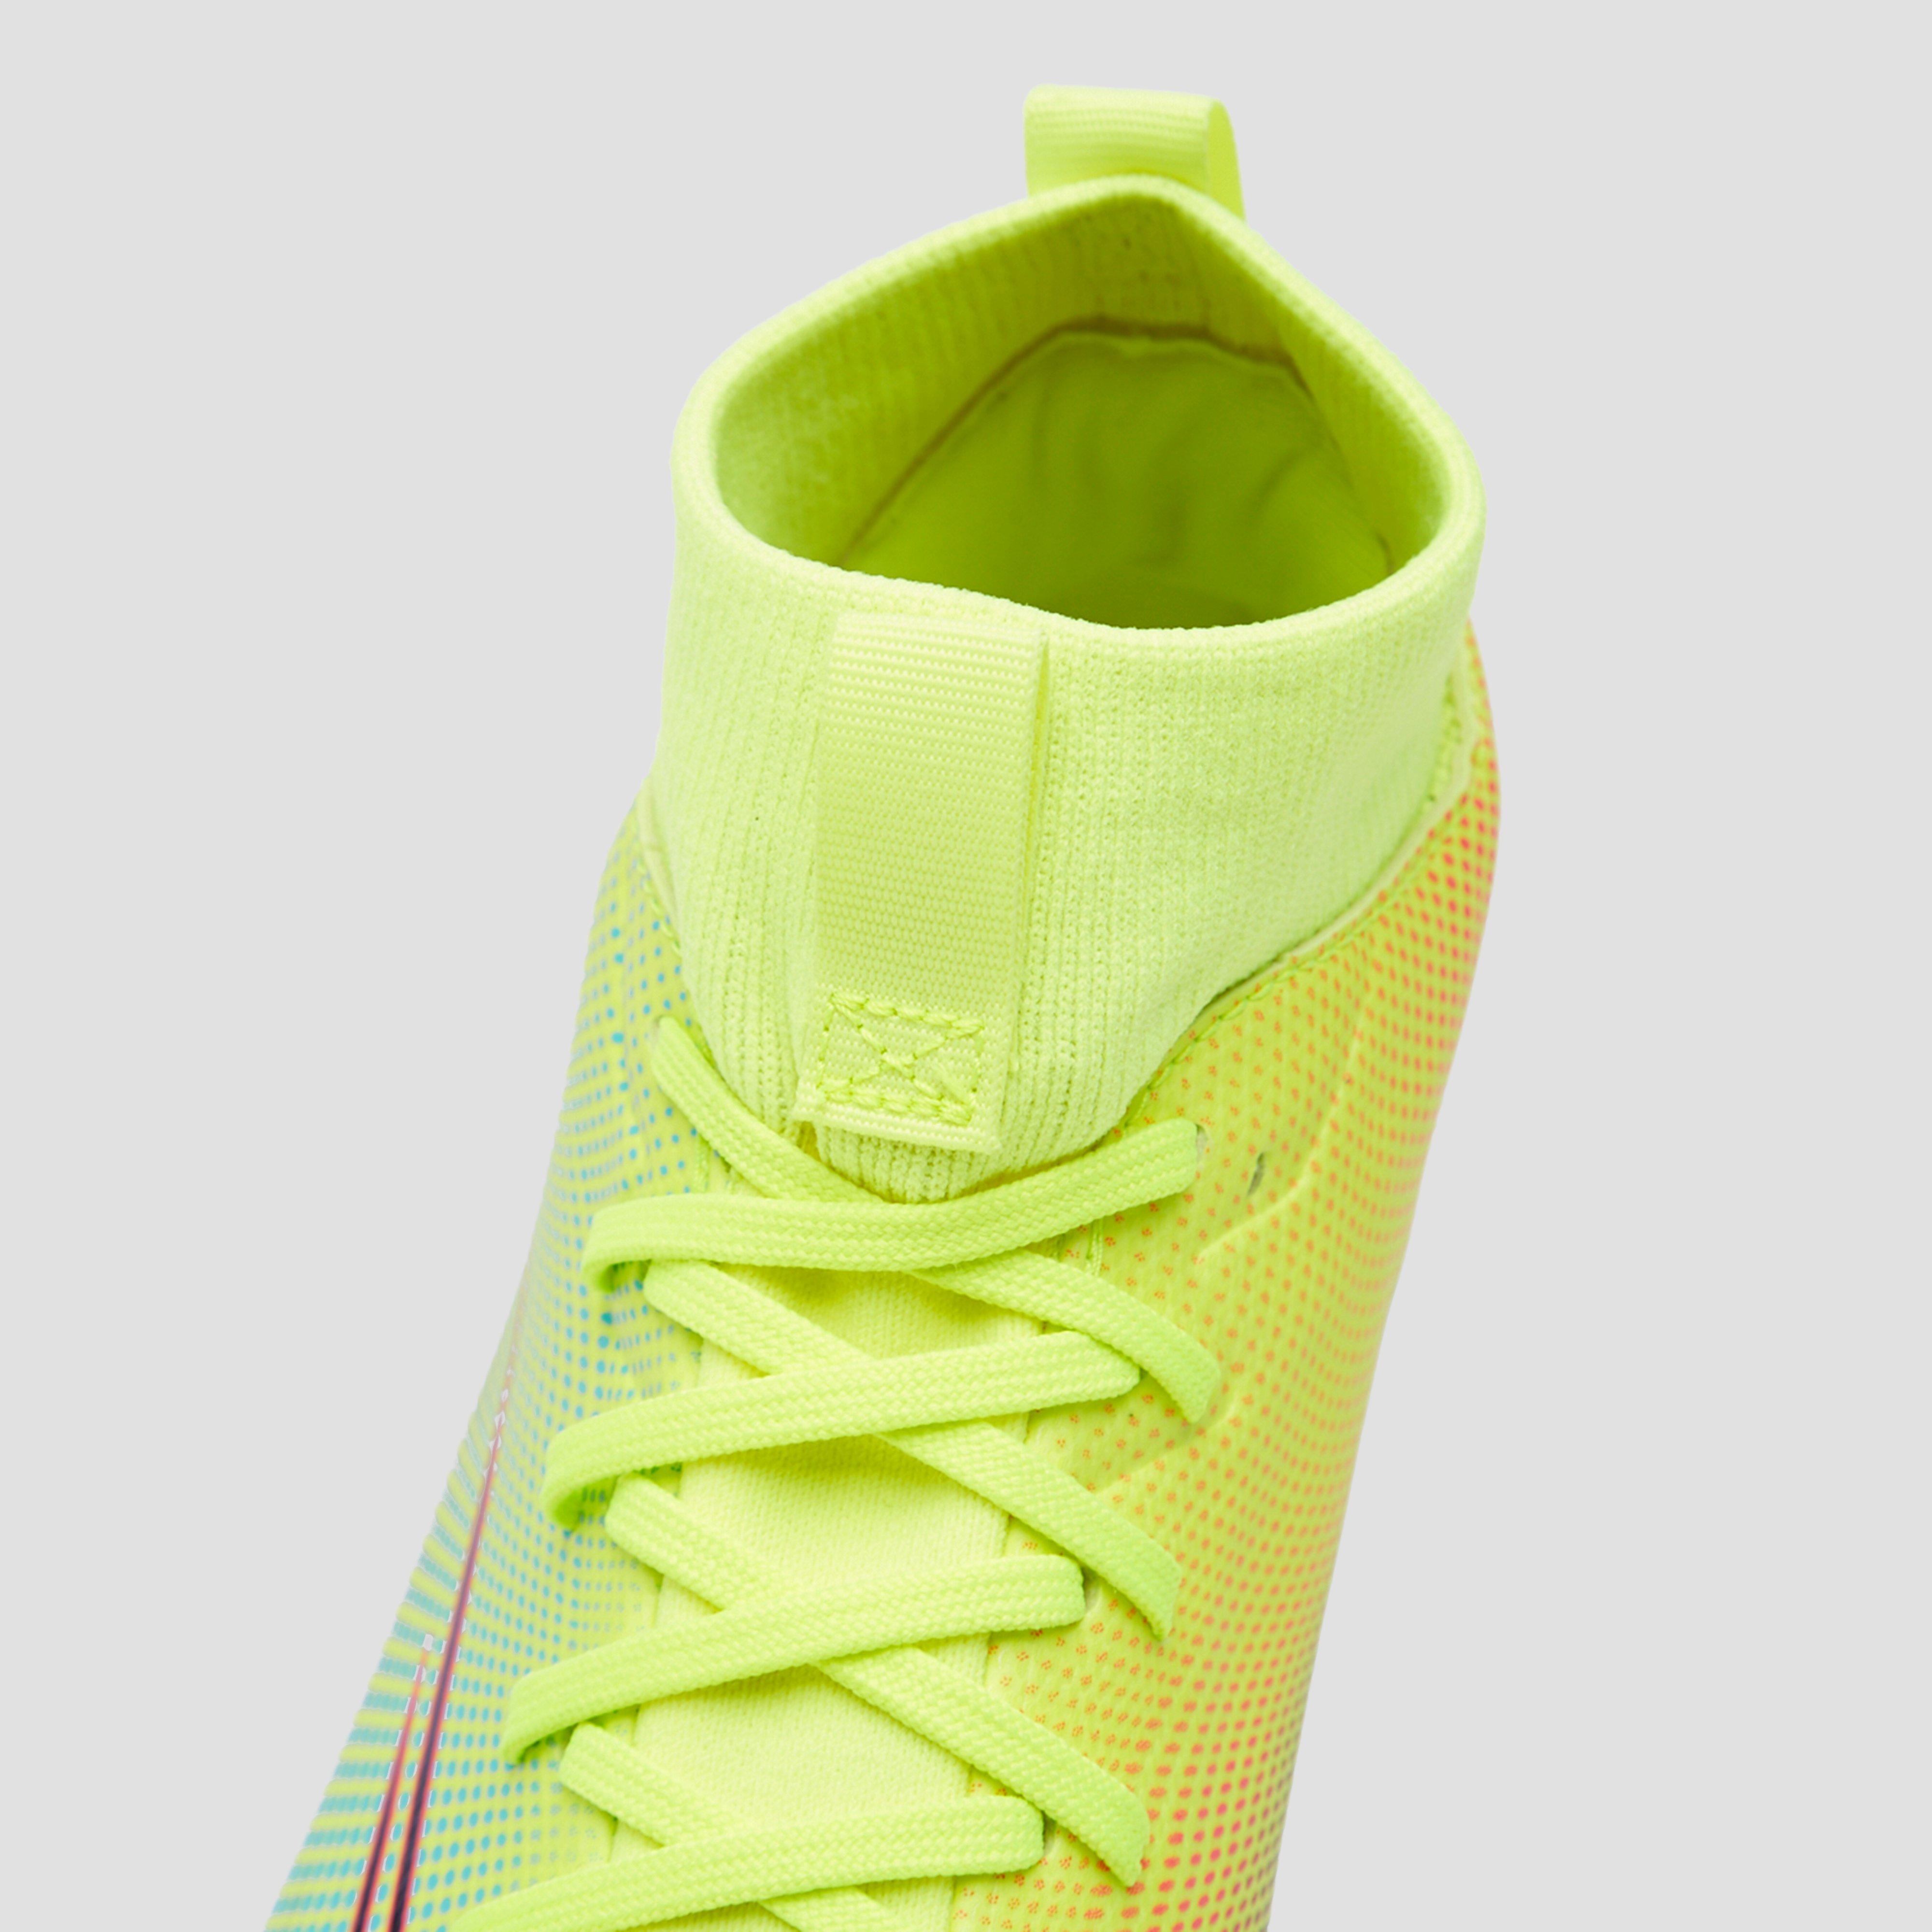 Nike jr. Mercurial Superfly 7 Academy MDS MG Youth Soccer.